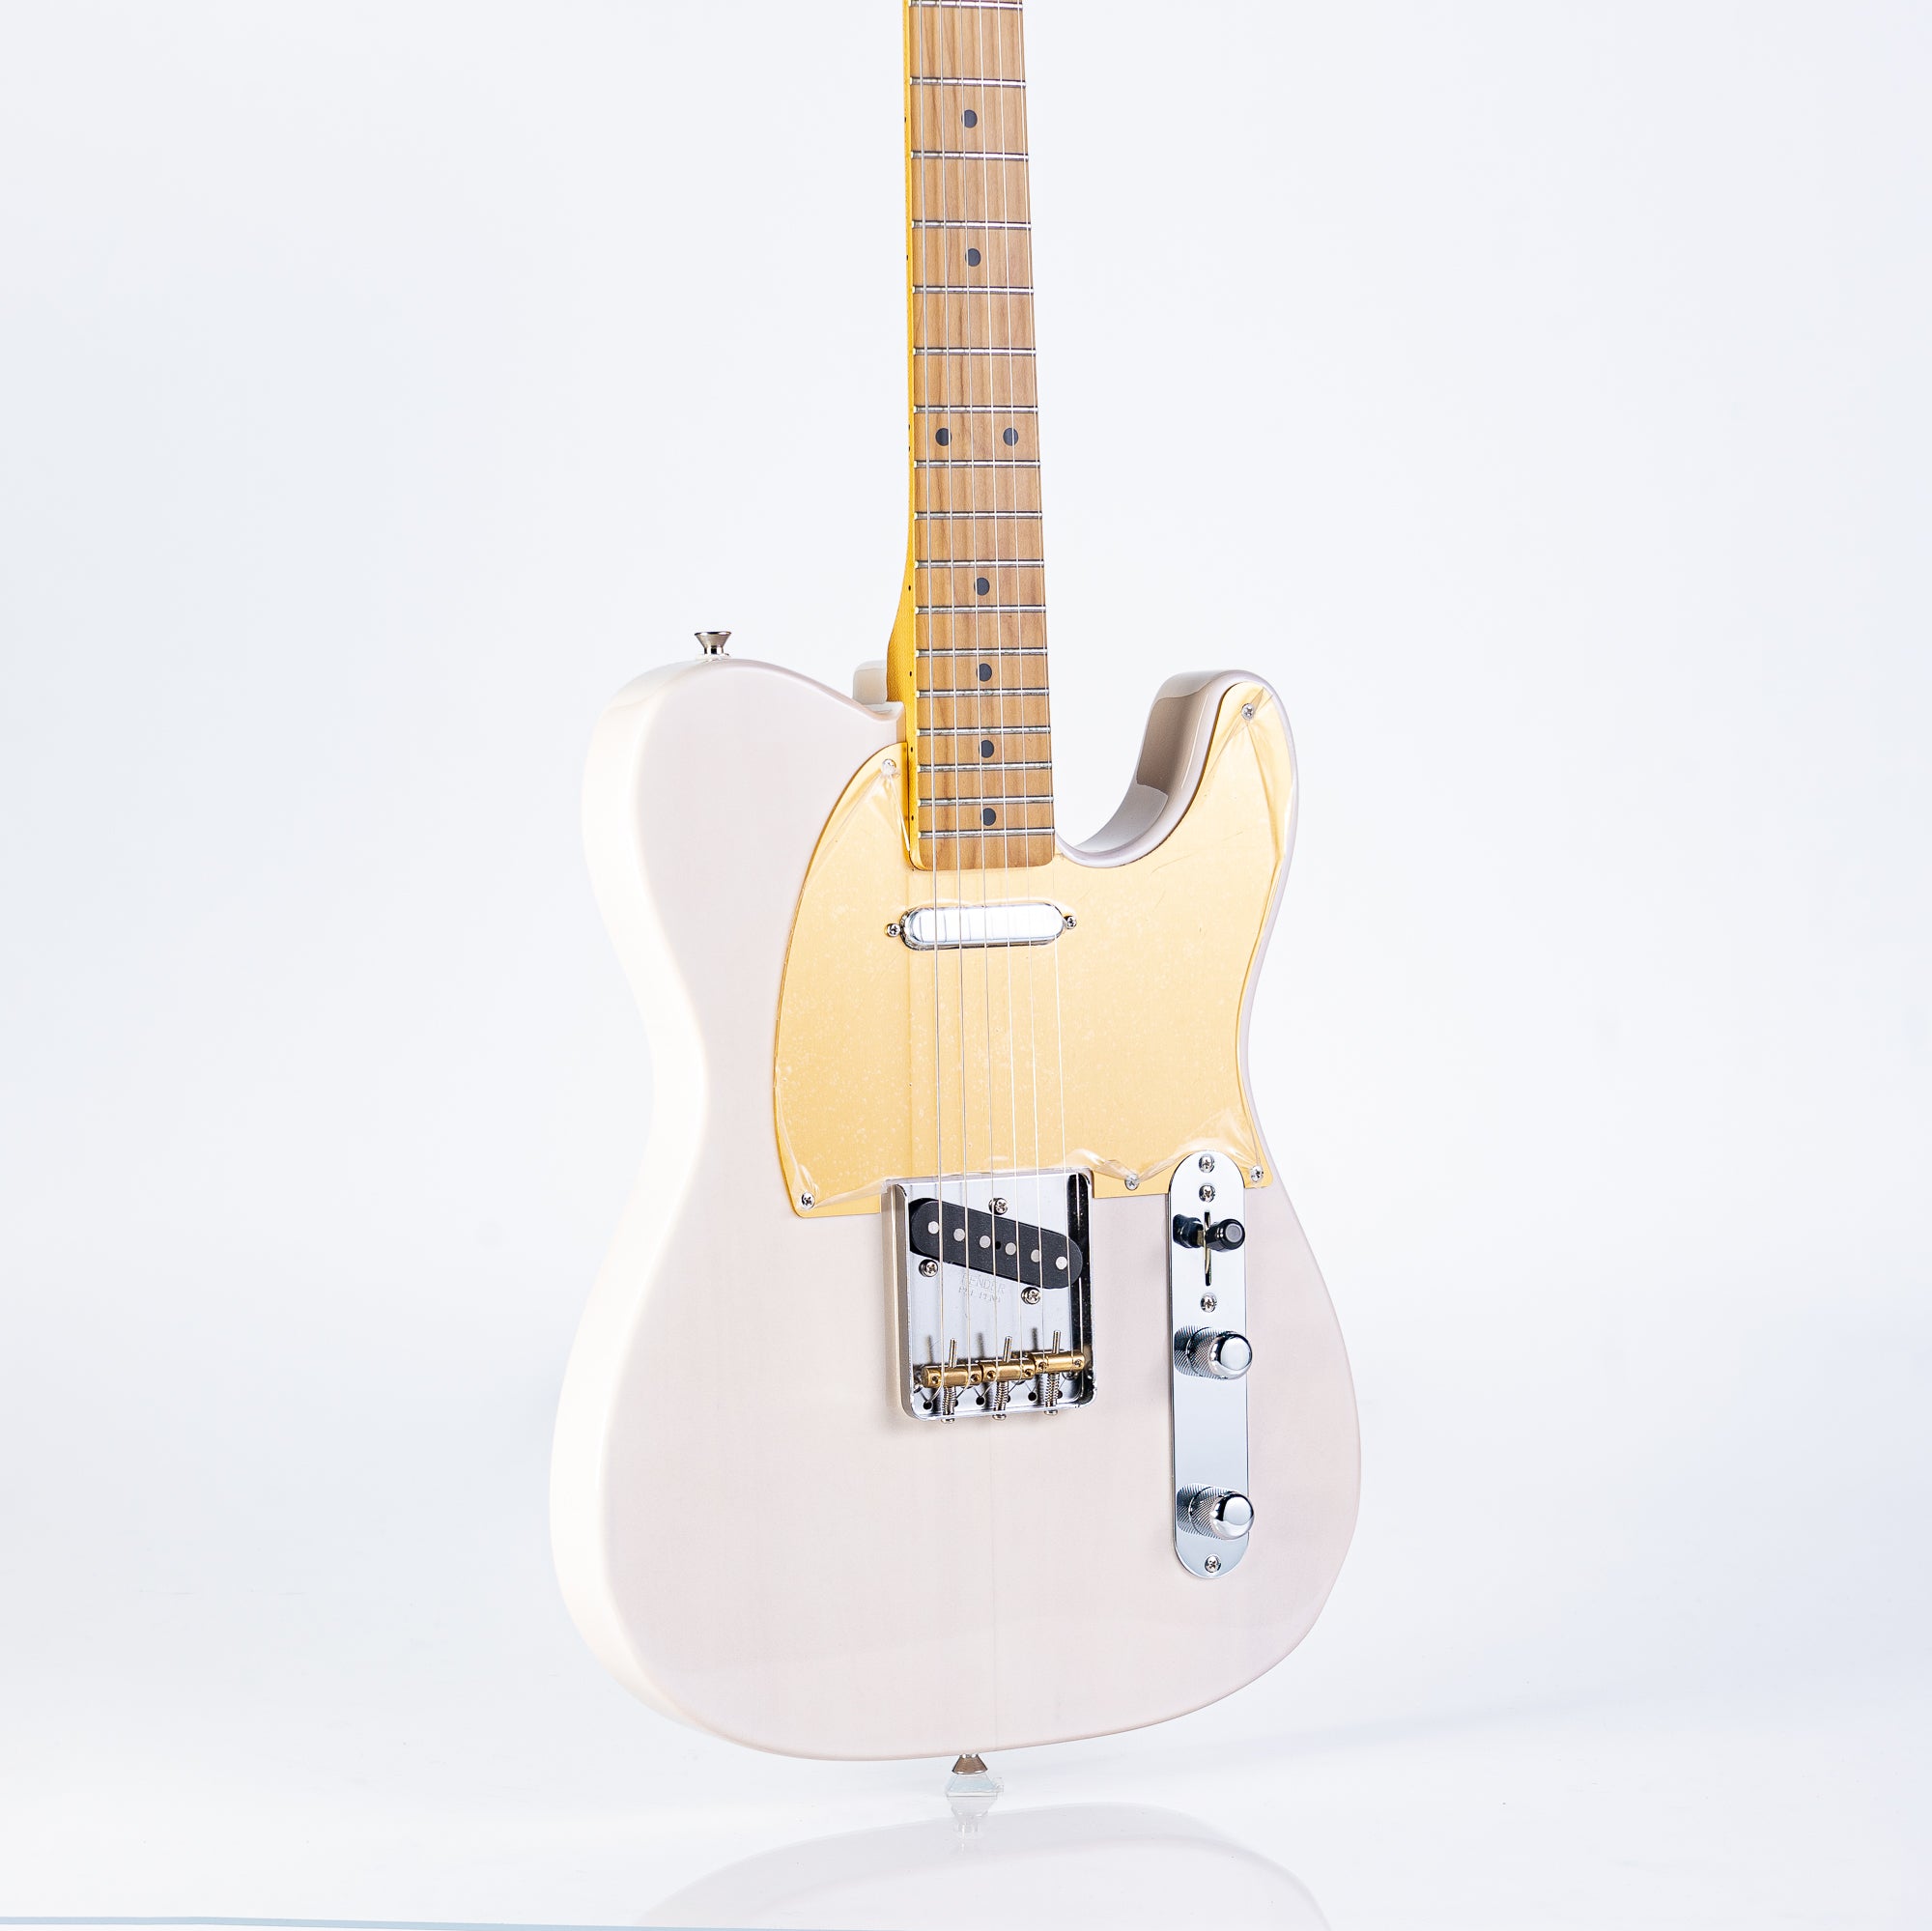 USED Fender JV Modified 50s Telecaster with Maple Fingerboard - White Blonde